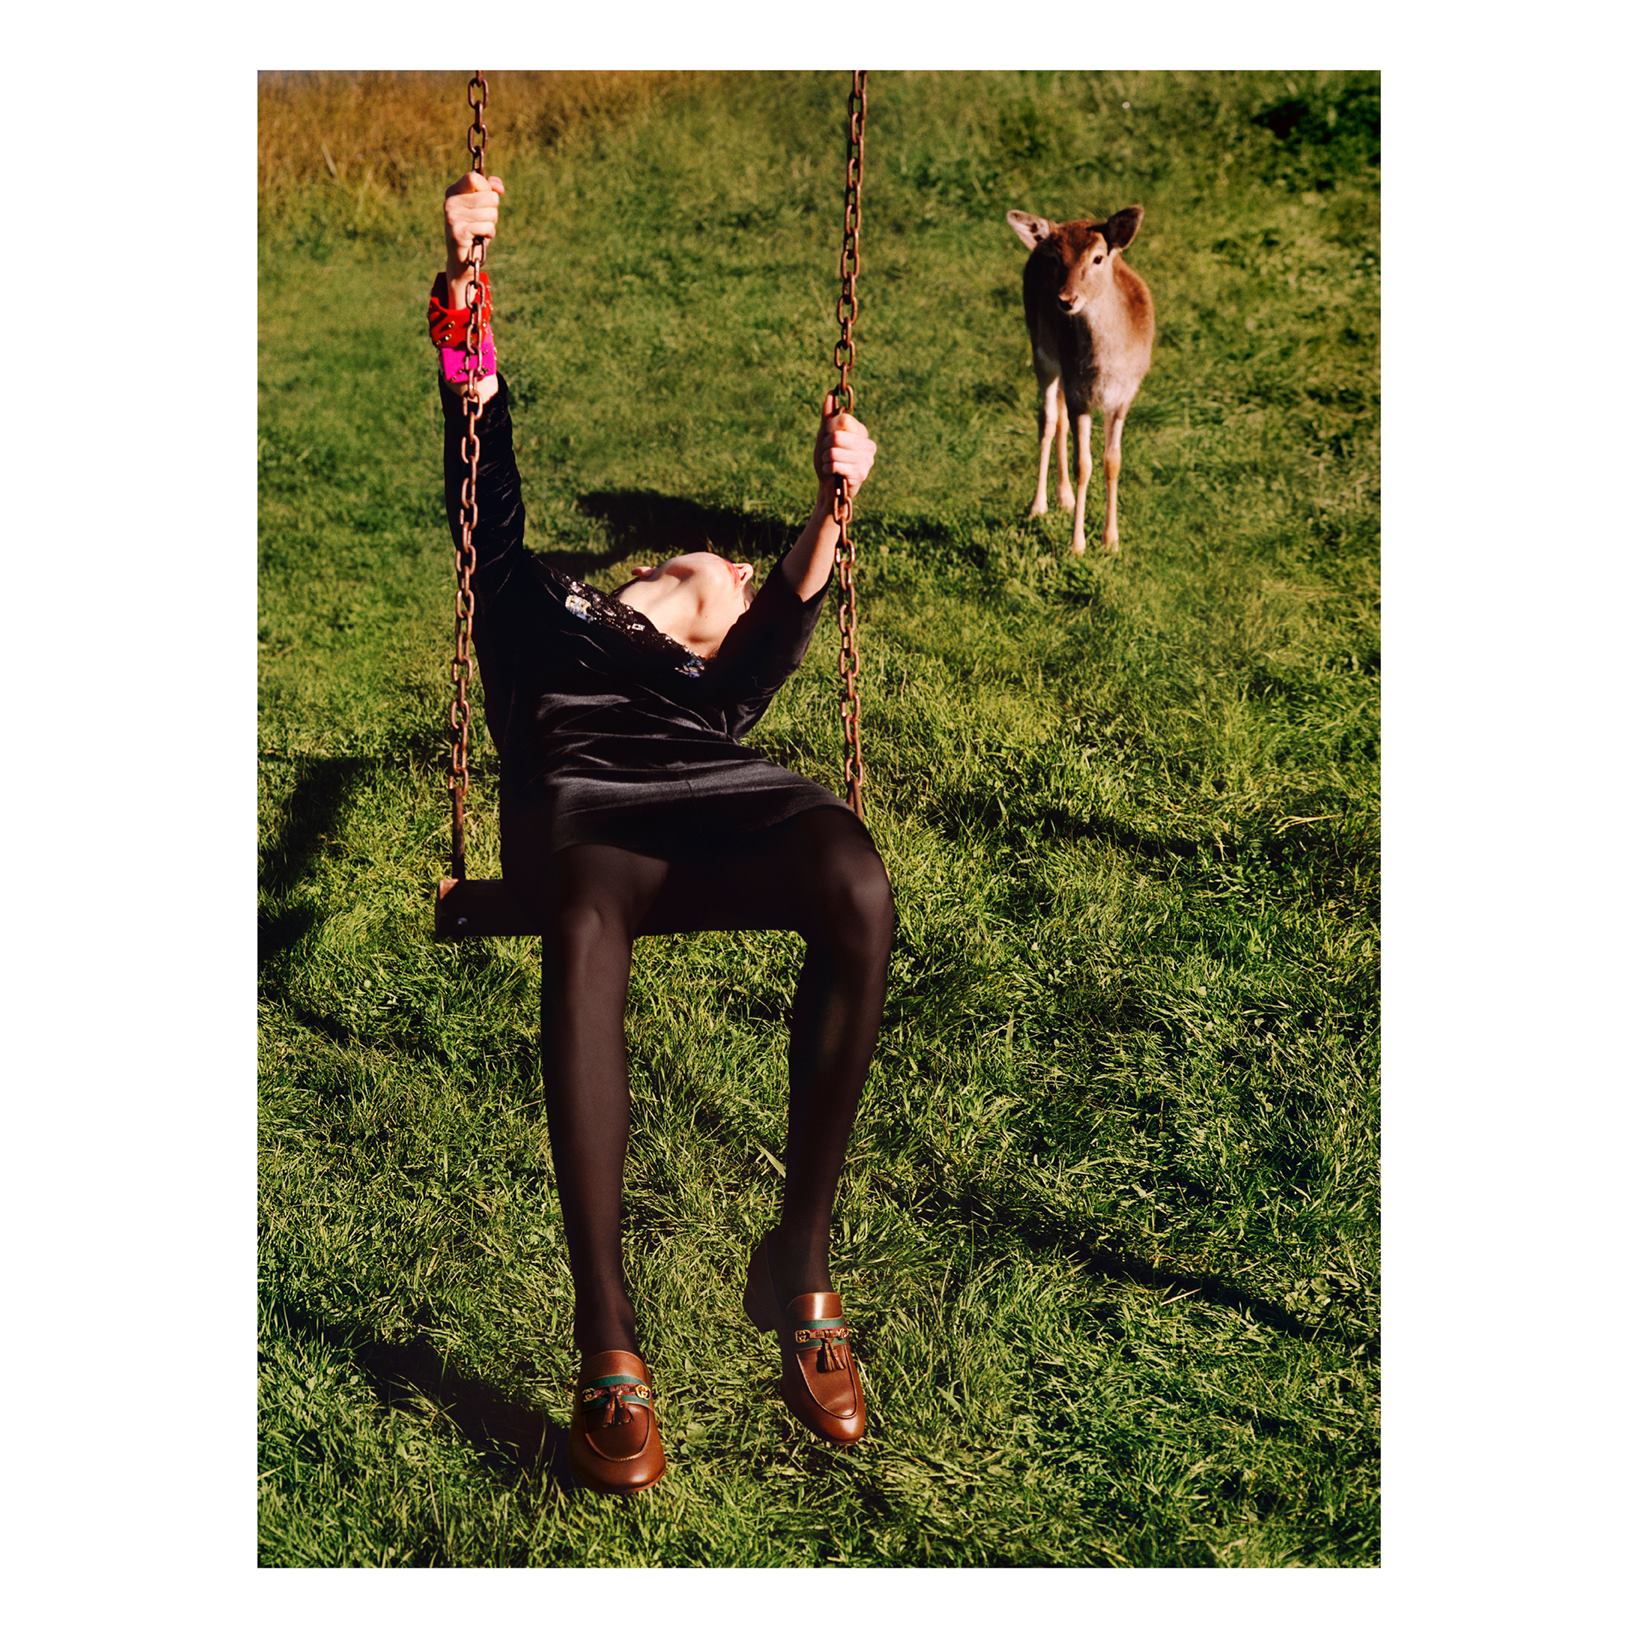 An image from the Gucci Pre-Fall 2020 So Deer To Me campaign inspired by childhood innocence, when as kids we rejoiced in nature. 